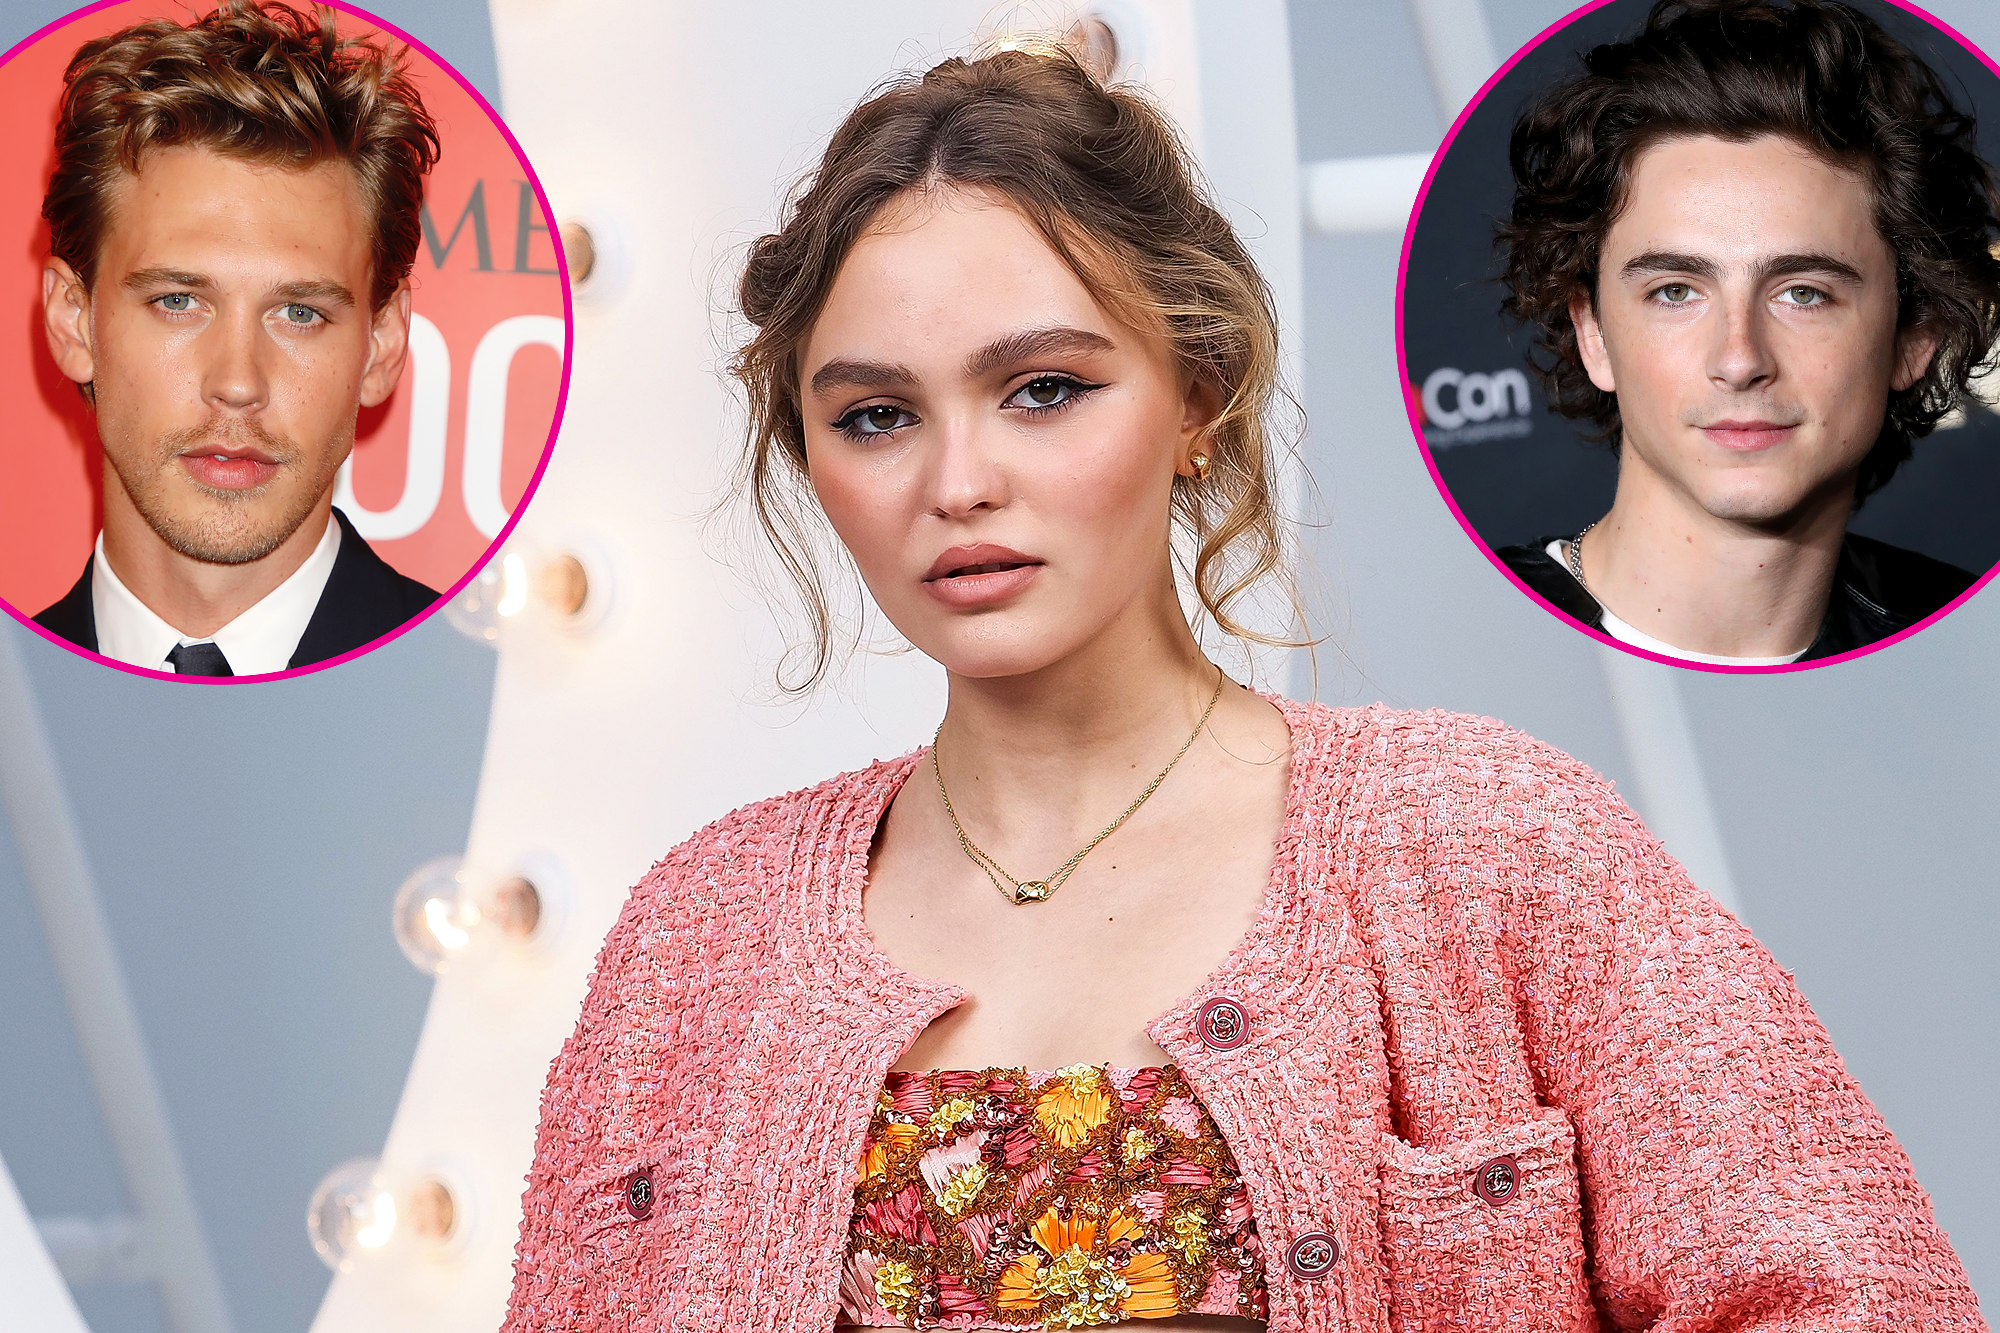 Lily-Rose Depp's Dating History: 070 Shake, Timothee Chalamet, More